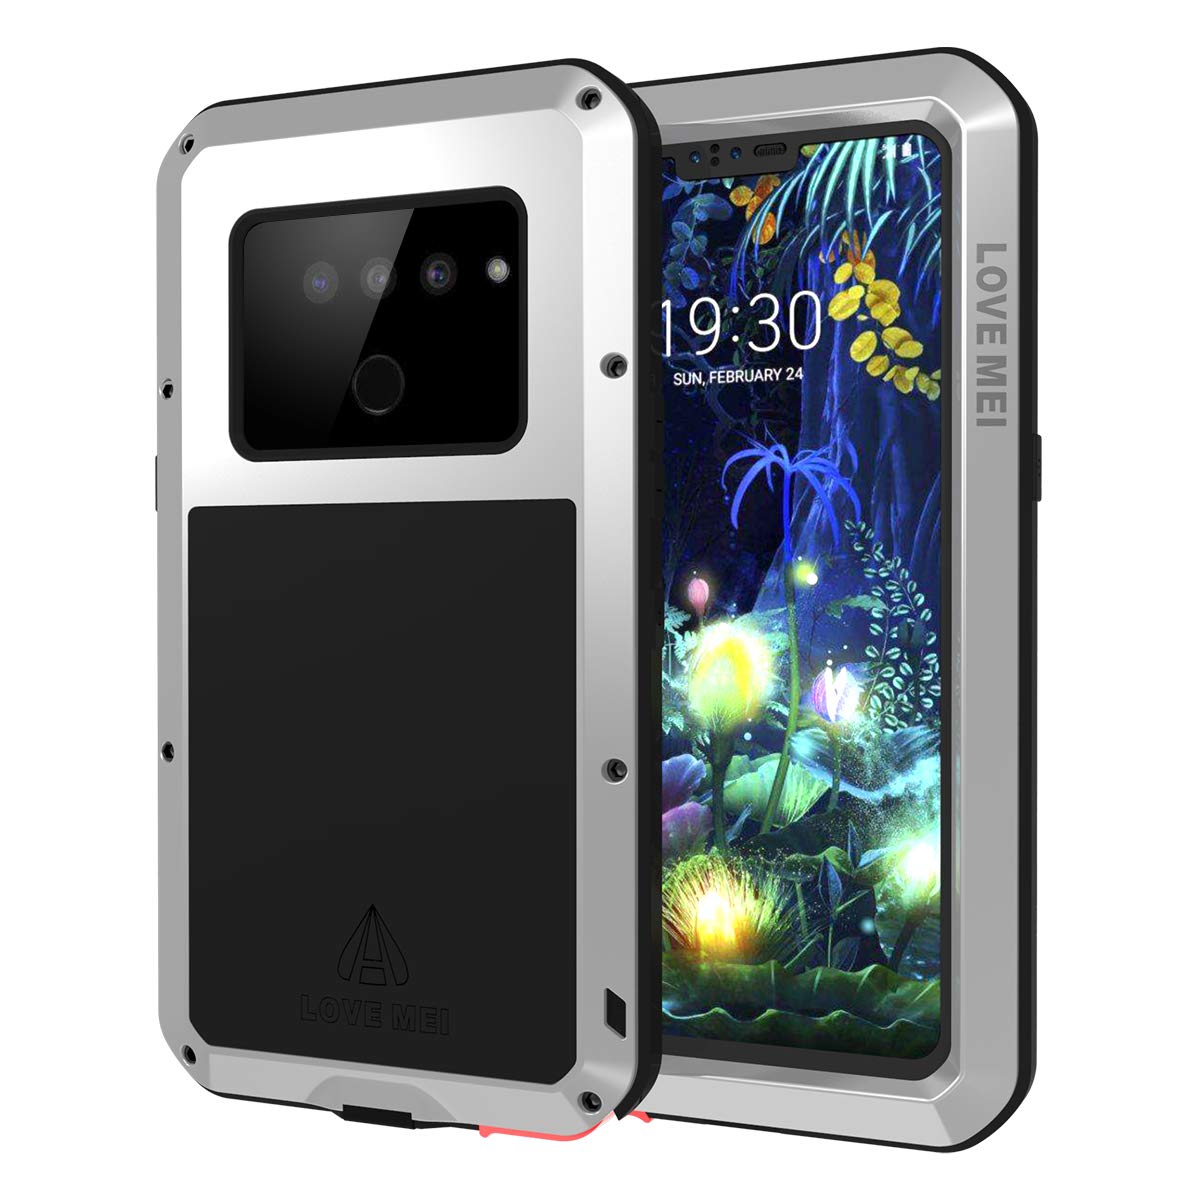 Lg V50 Thinq Case Shockproof Metal Armor Supports Wireless Charging Full Body Protective Heavy Sturdy Lg V50 Thinq Cover With Screen Protector